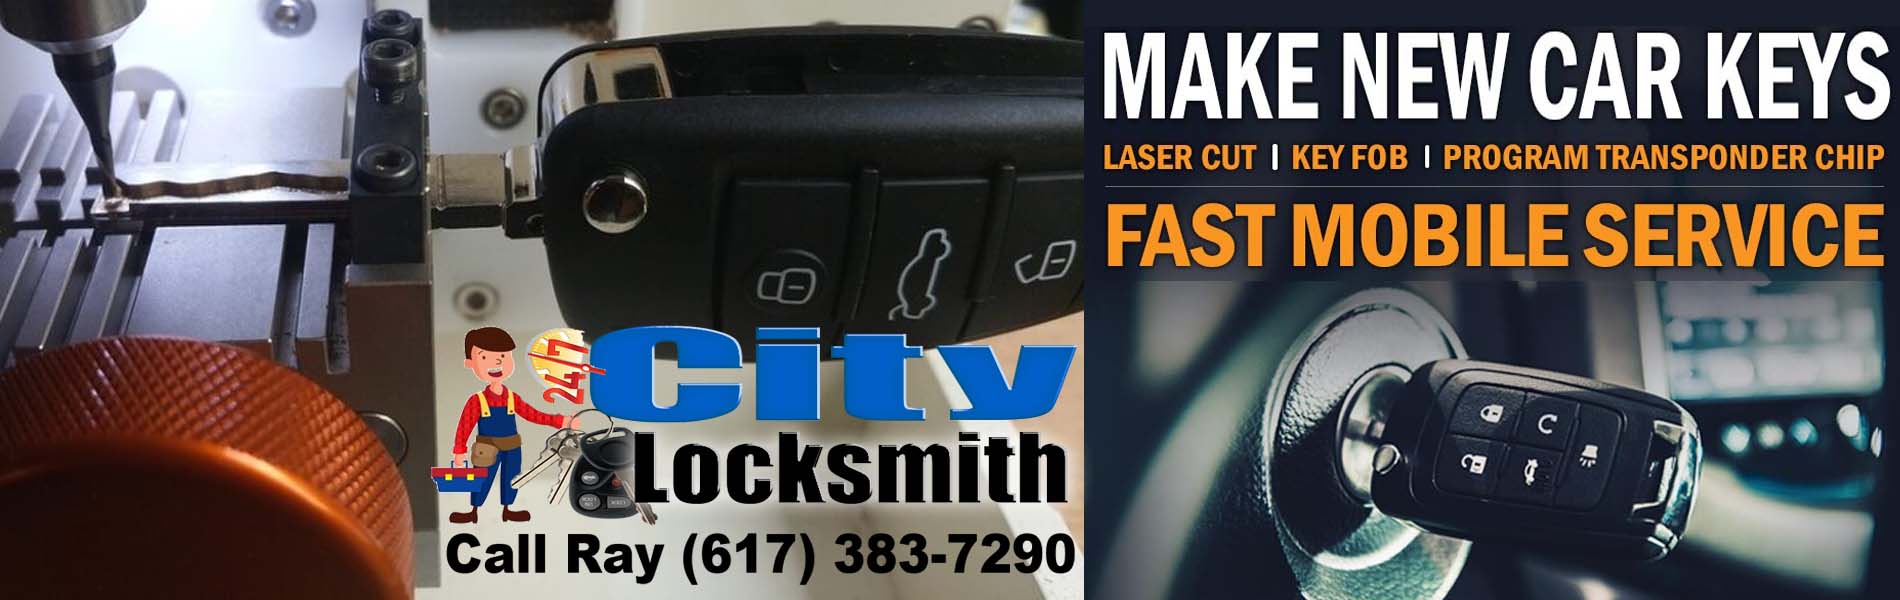 Safe Locksmith Services   Lock Dawg   Safe Combo Change & Repairs